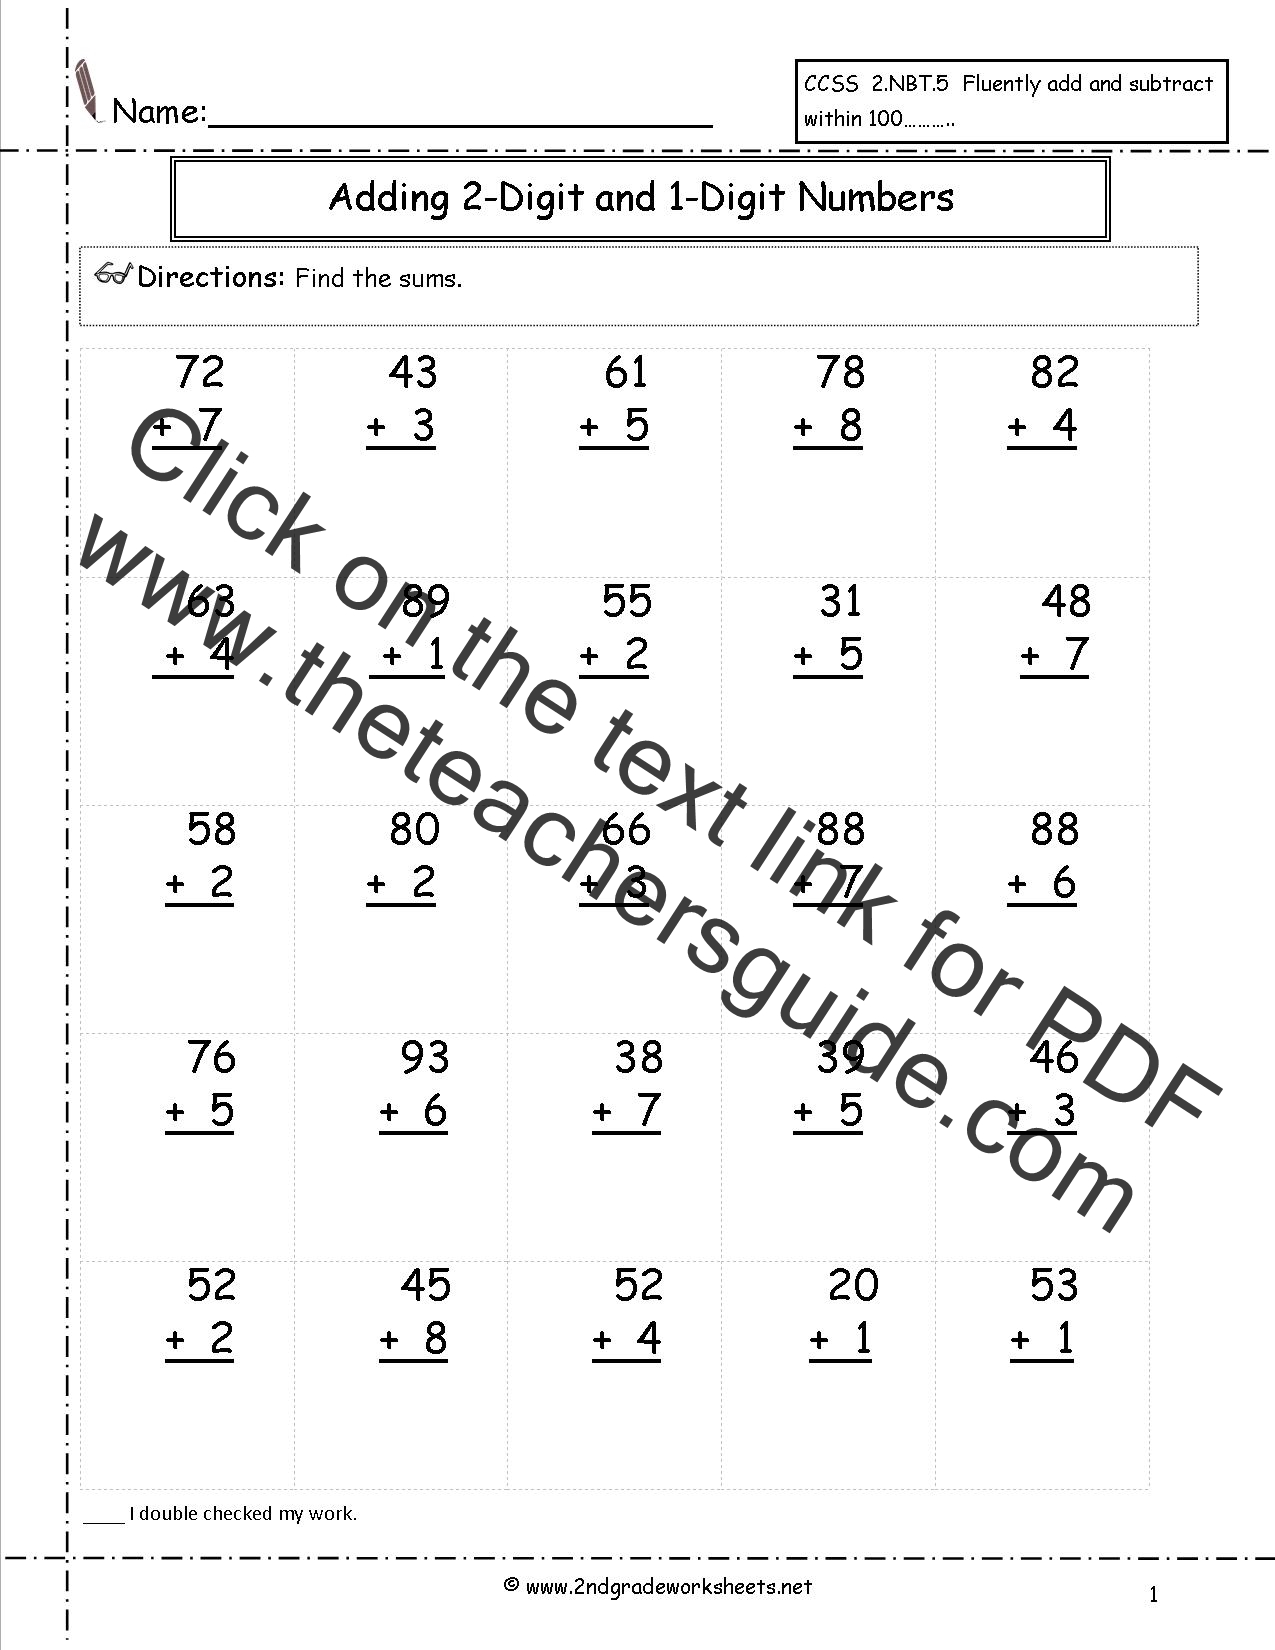 adding-two-digit-and-one-digit-numbers-2nd-grade-math-worksheets